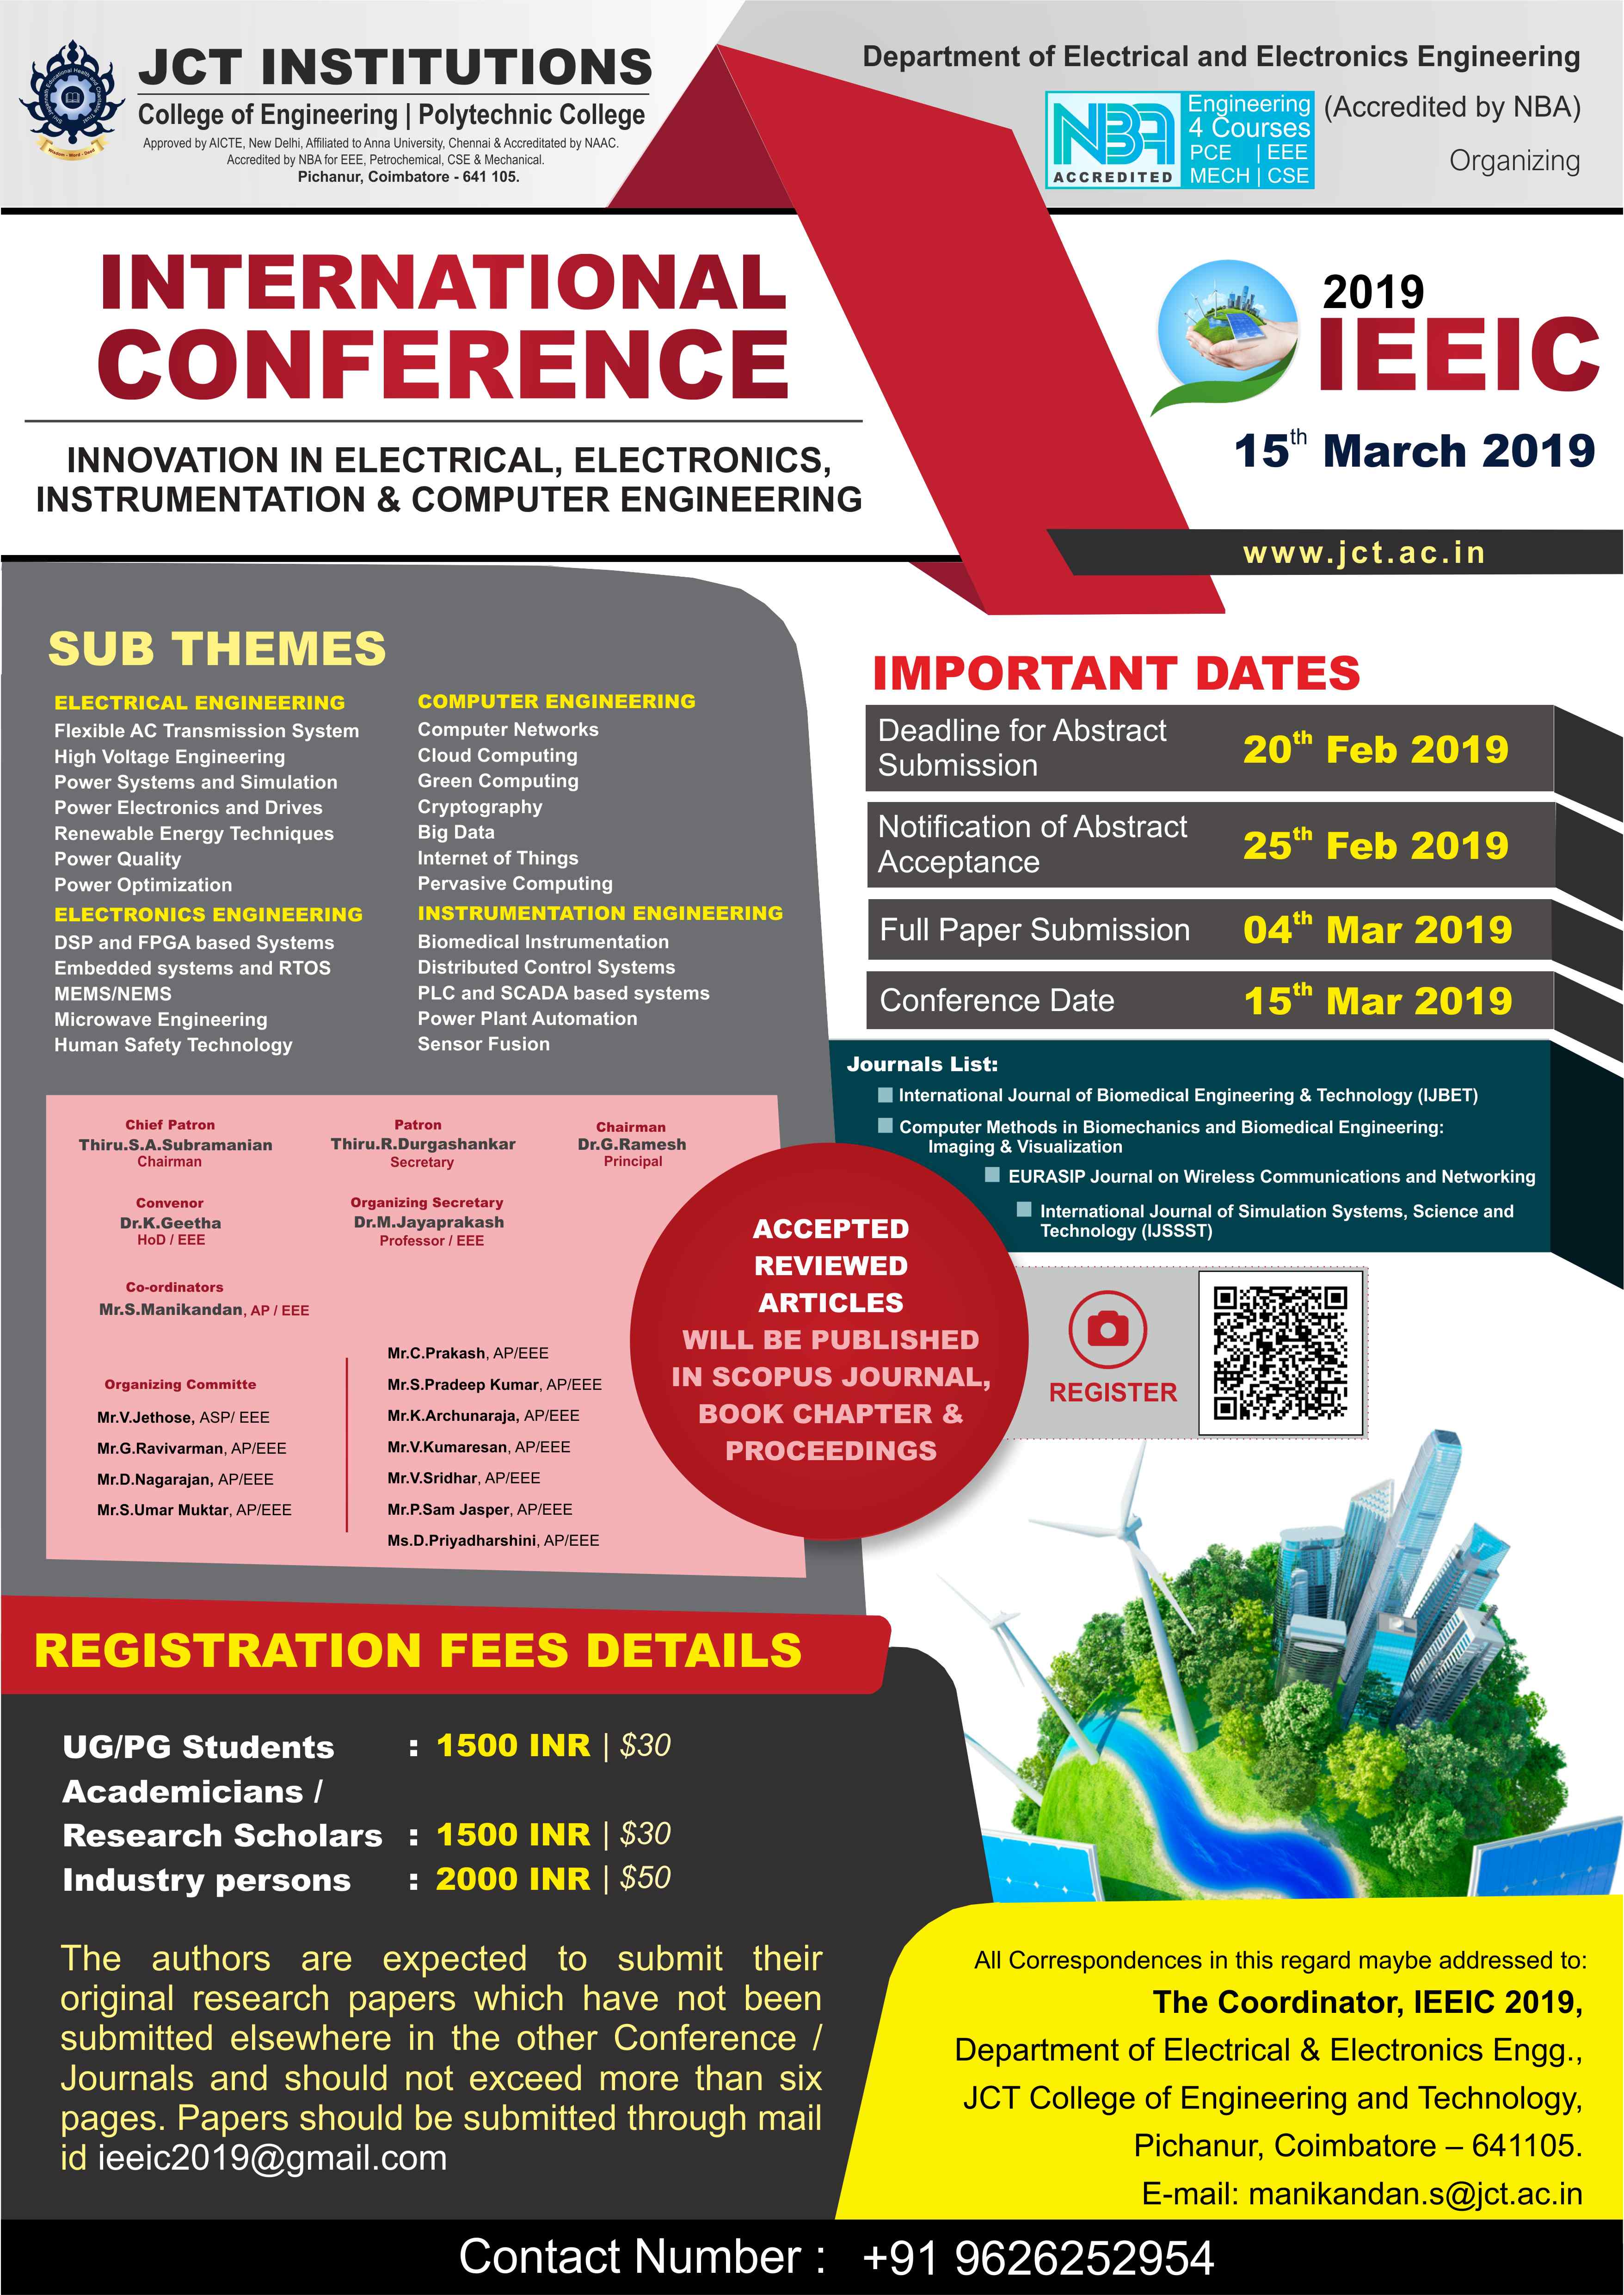 International Conference on Innovation in Electrical, Electronics, Instrumentation and Computer Engineering, Coimbatore, Tamil Nadu, India